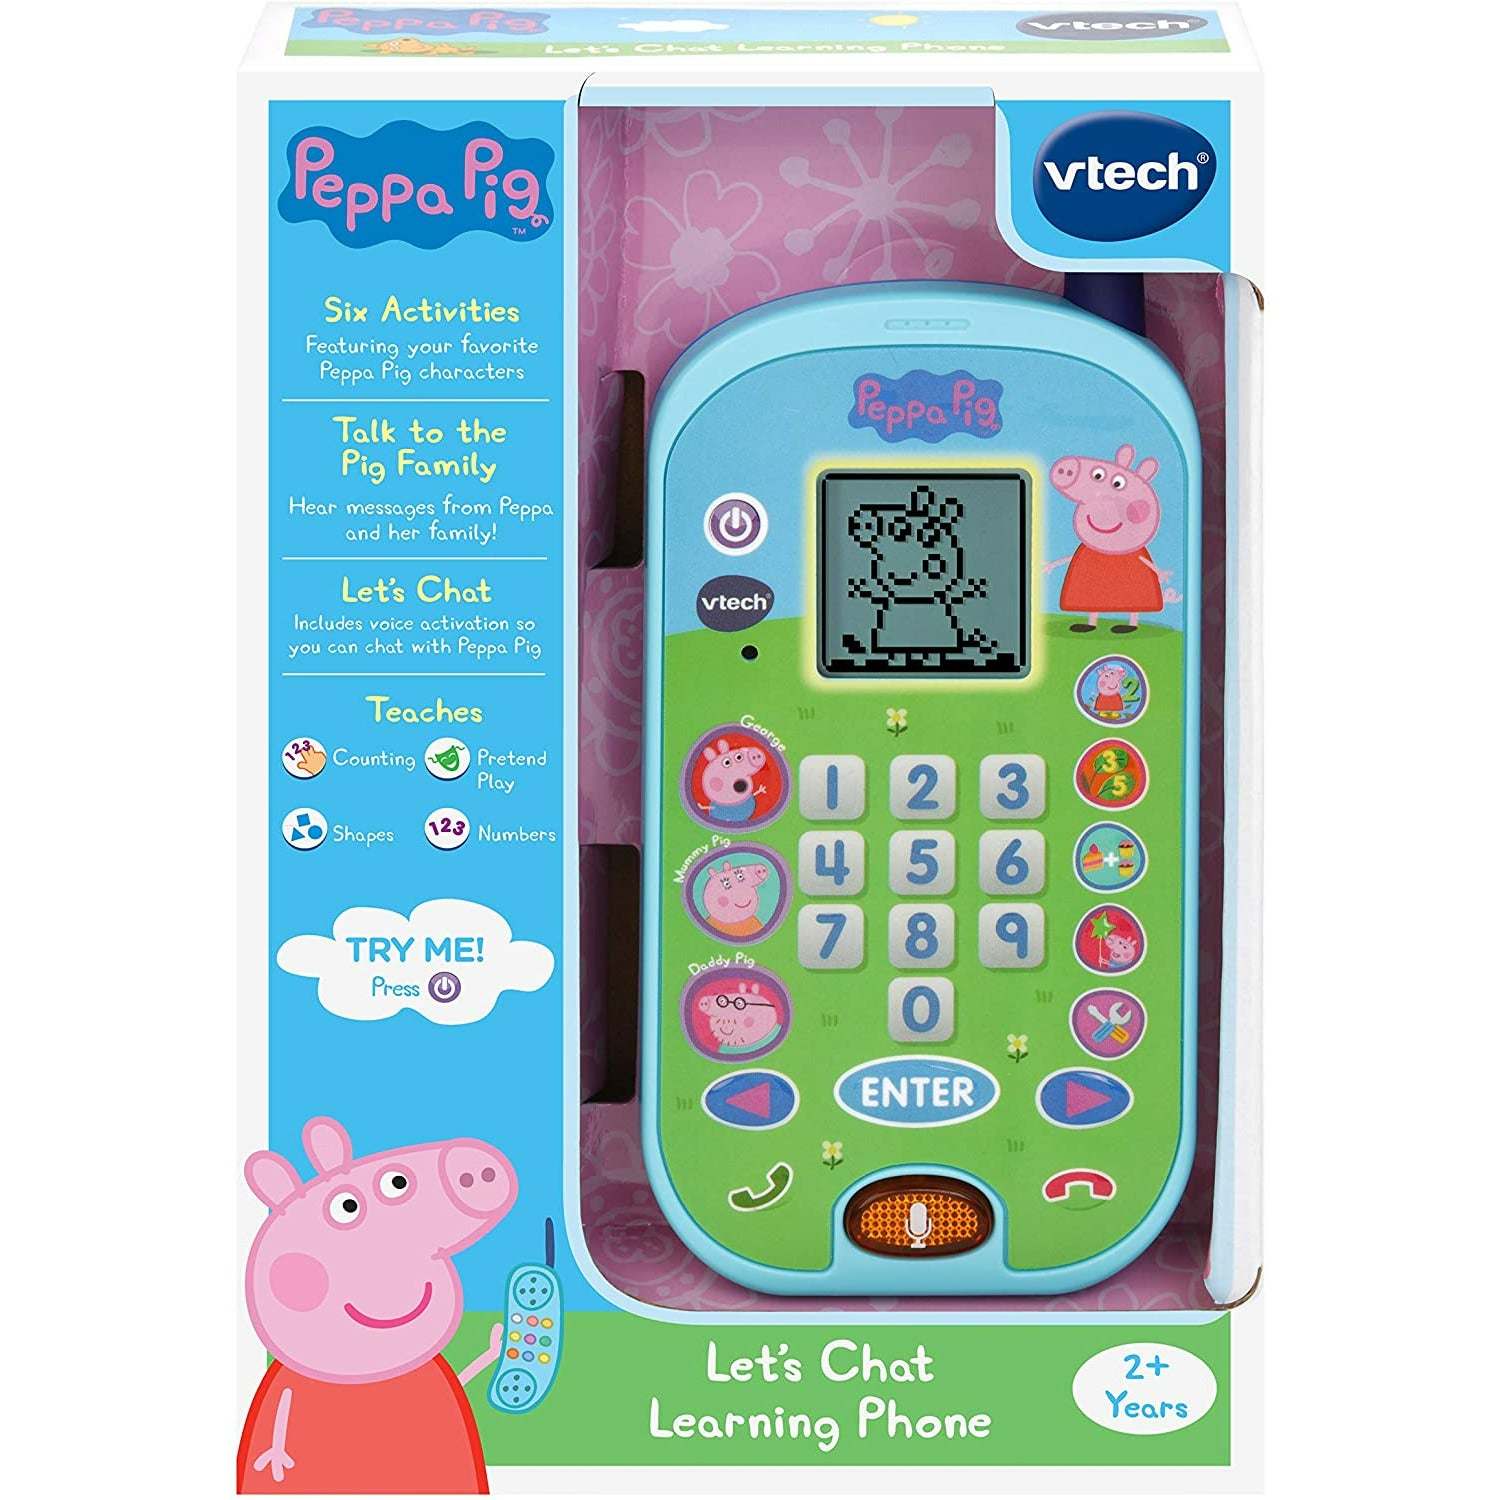 A VTech Peppa Pig Let's Chat Learning Phone featuring a Peppa Pig design, numeric keypad, function buttons, and a small screen displaying a Peppa Pig image. It also offers voice-activated conversations and fun learning games for an engaging playtime experience.